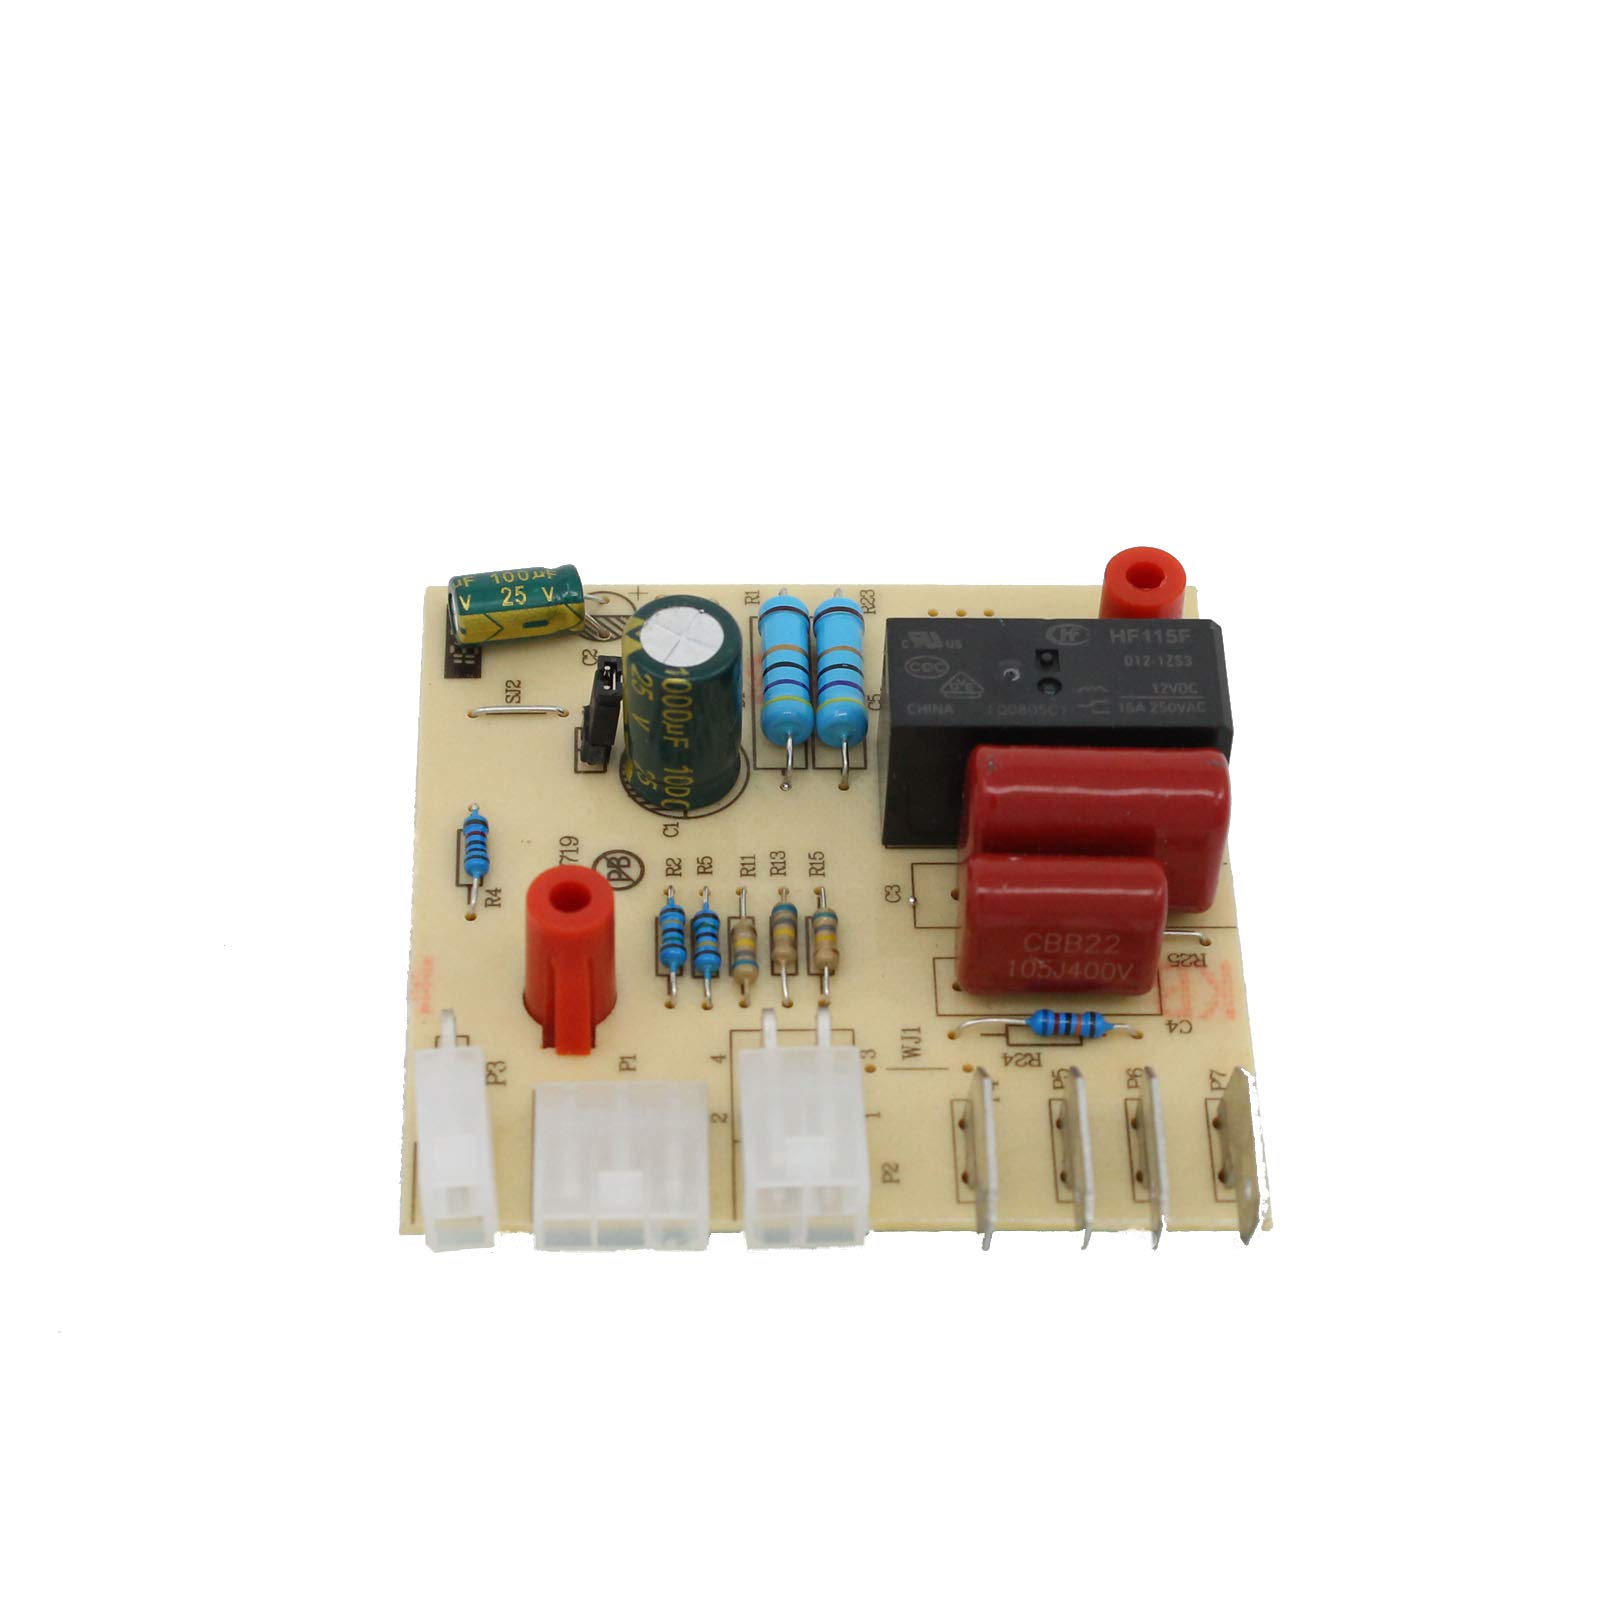 W10366605 Defrost Control Board Replacement for Whirlpool WRS325FDAM04 Refrigerator - Compatible with WPW10366605 Control Board - UpStart Components Brand